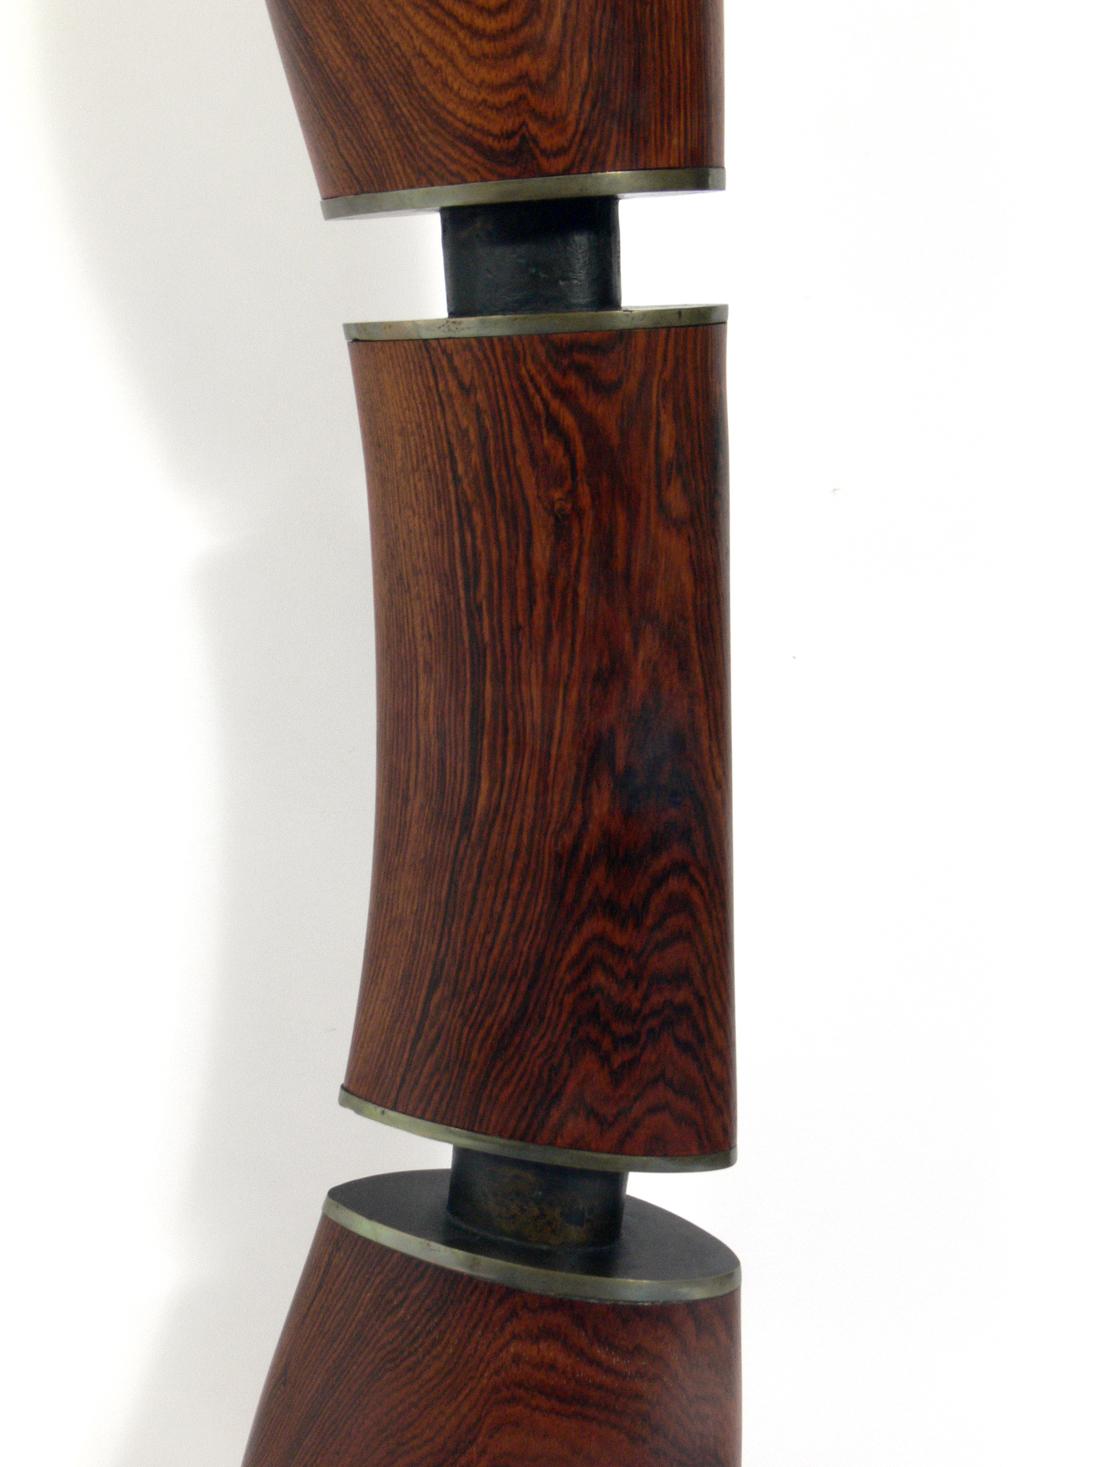 American Rosewood and Bronze Totem Sculpture by Alden Smith